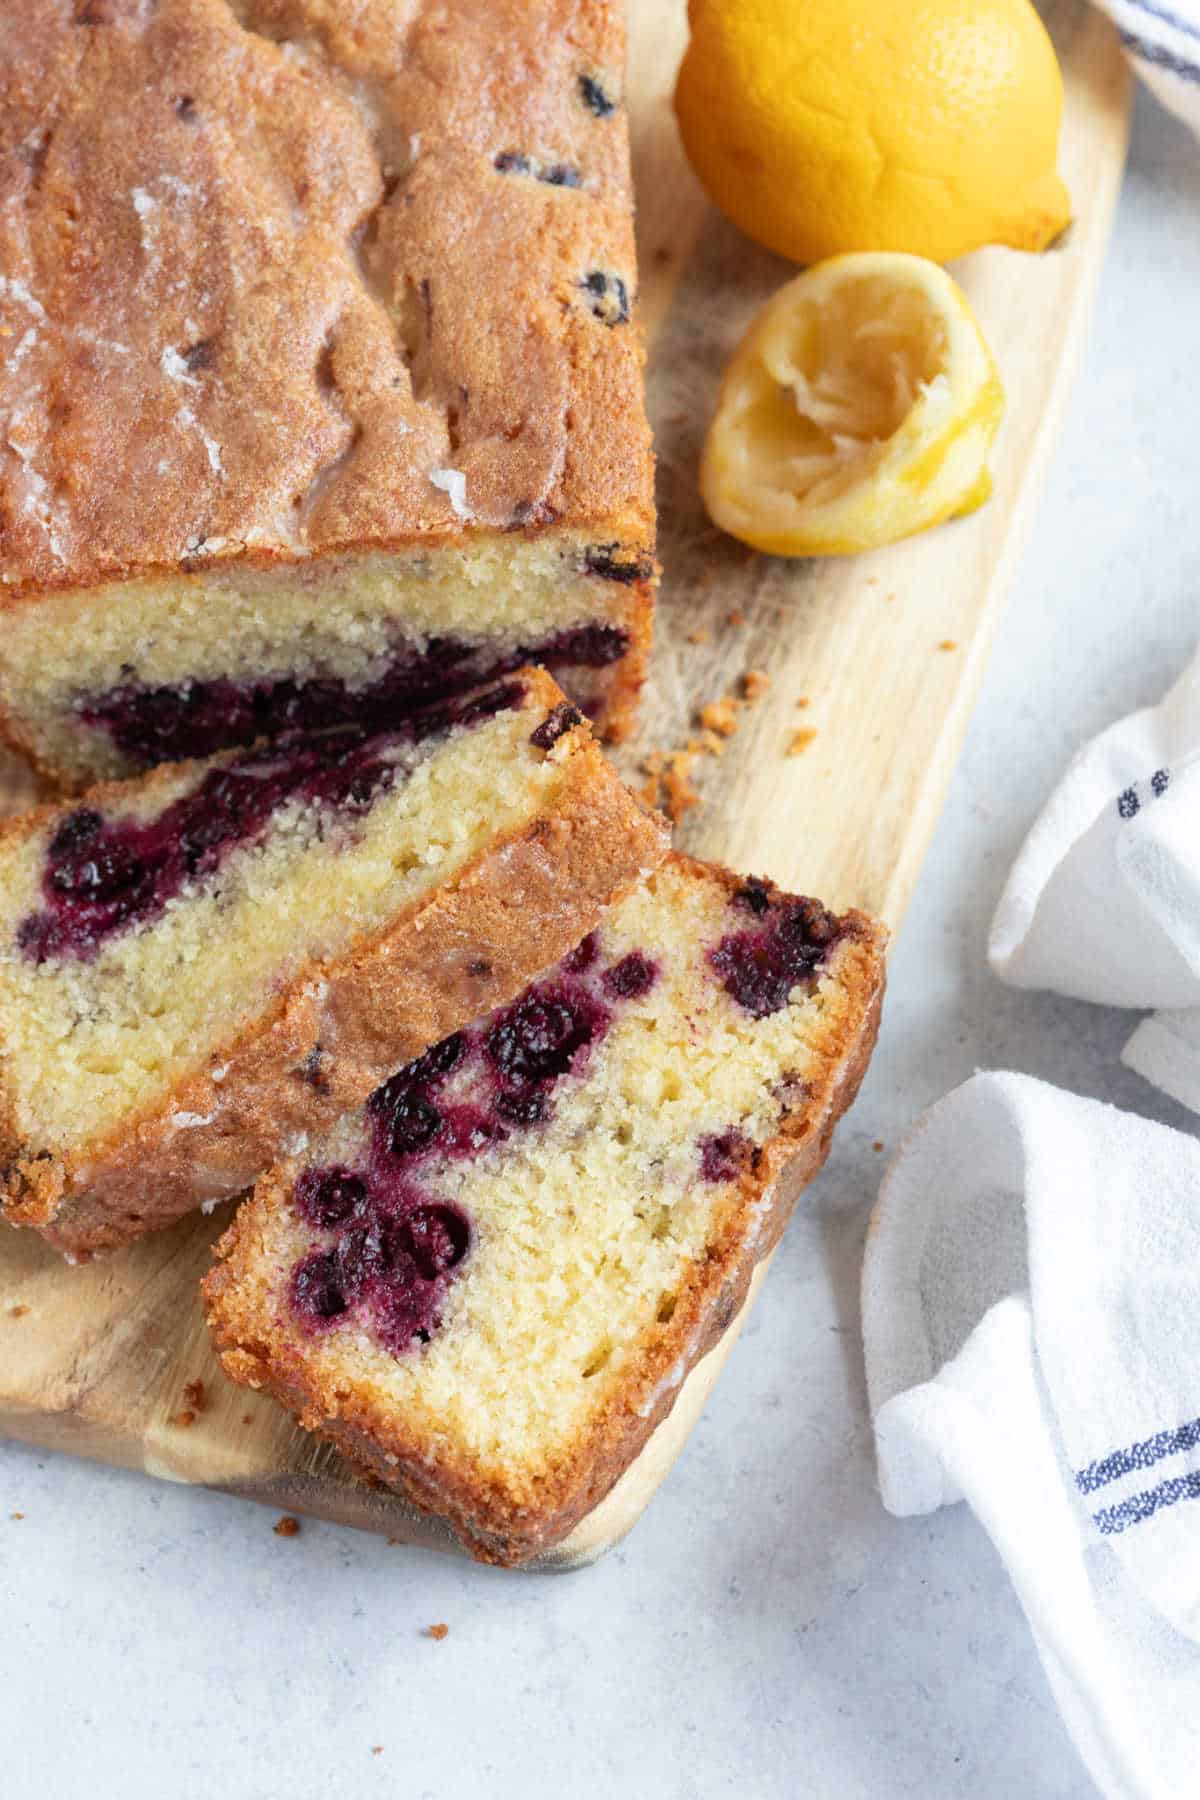 Slices of blackcurrant cake.